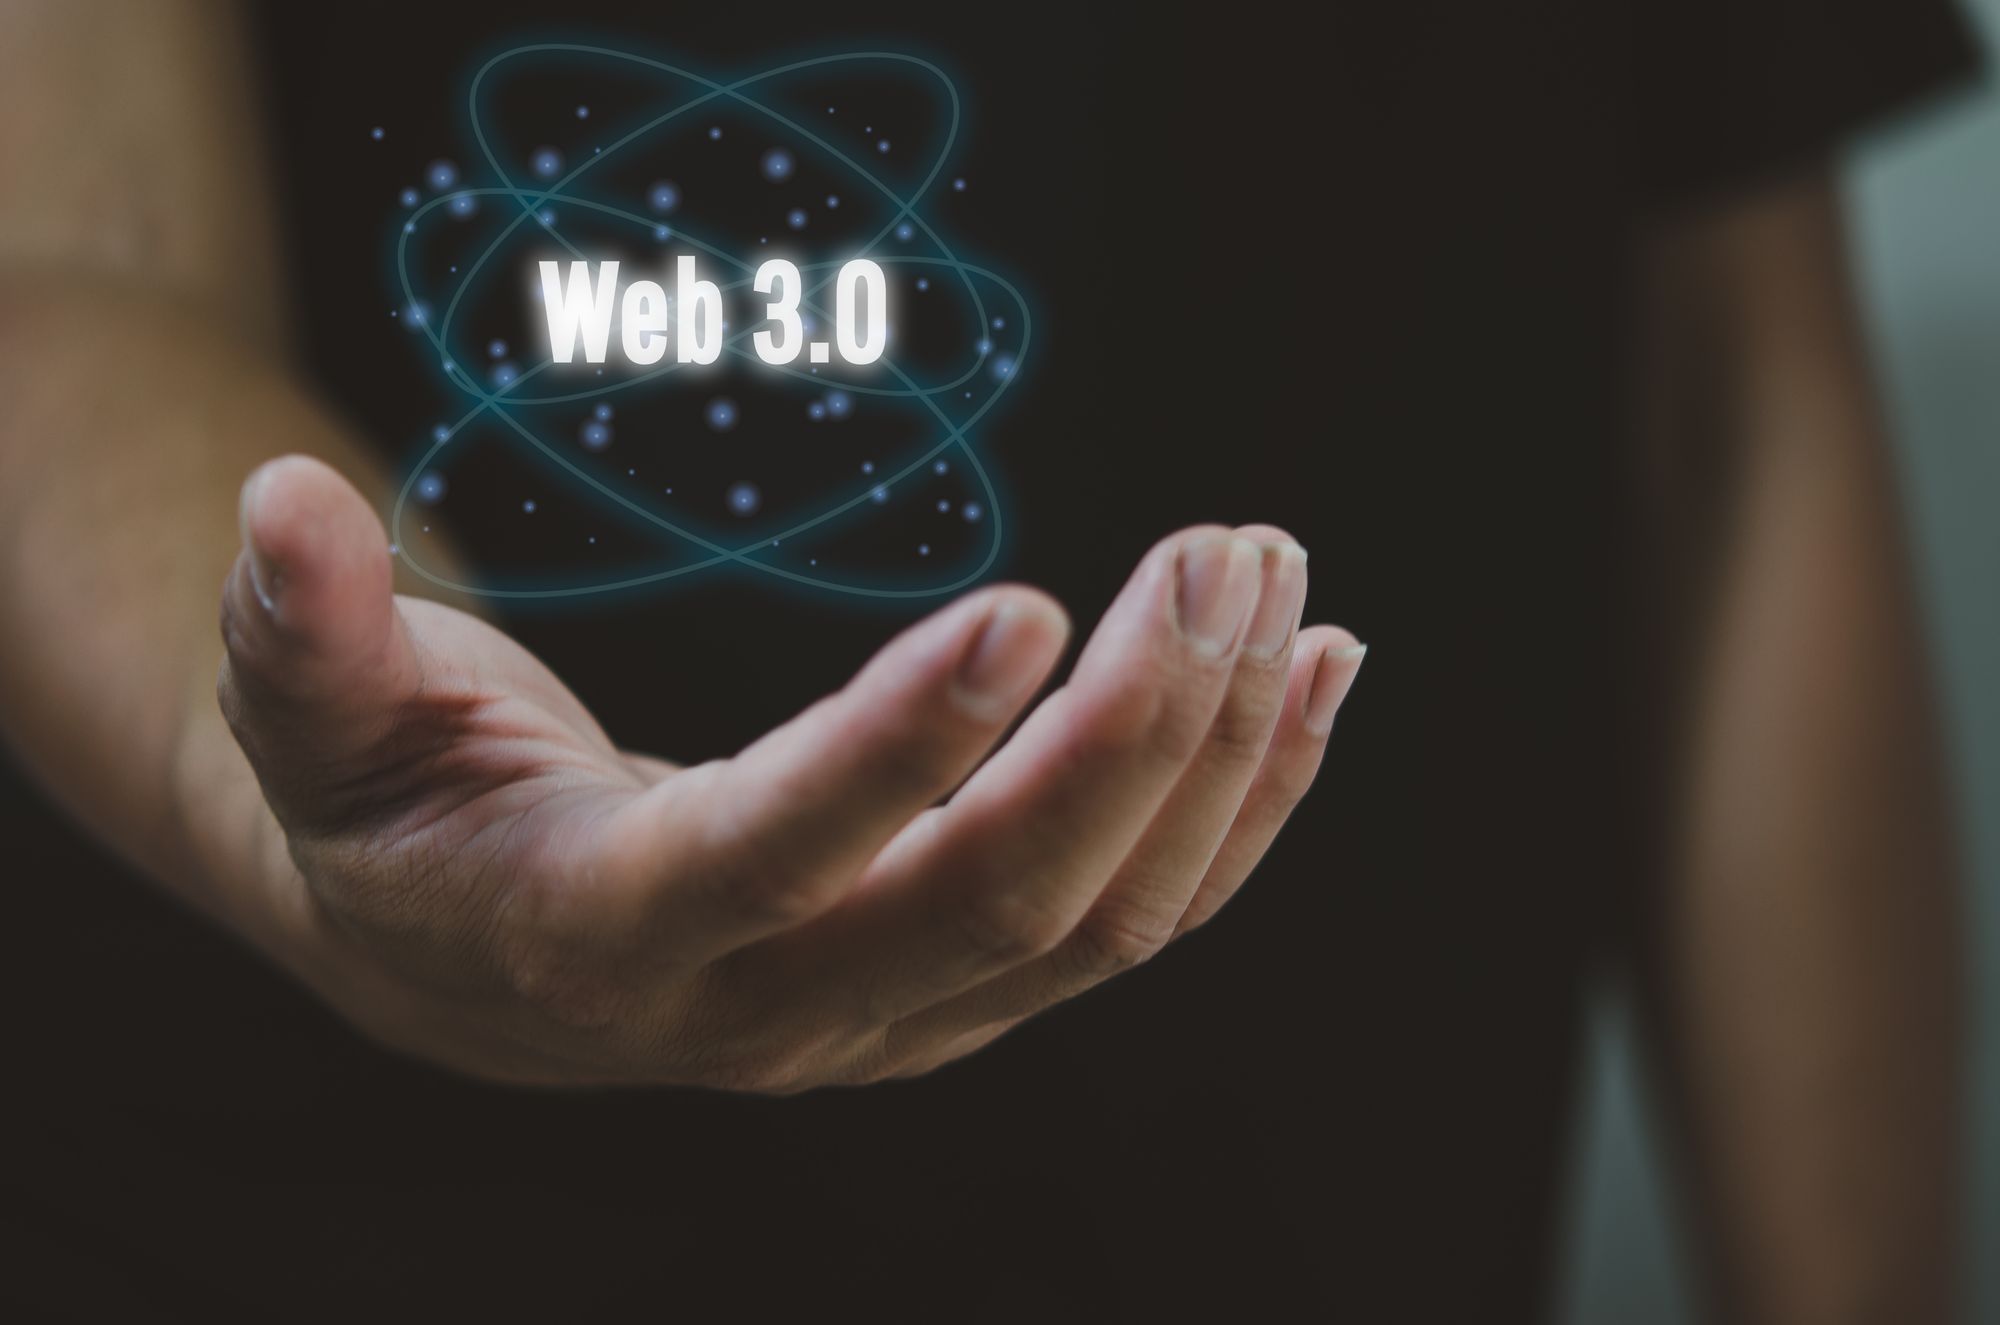 Web3 pros and cons